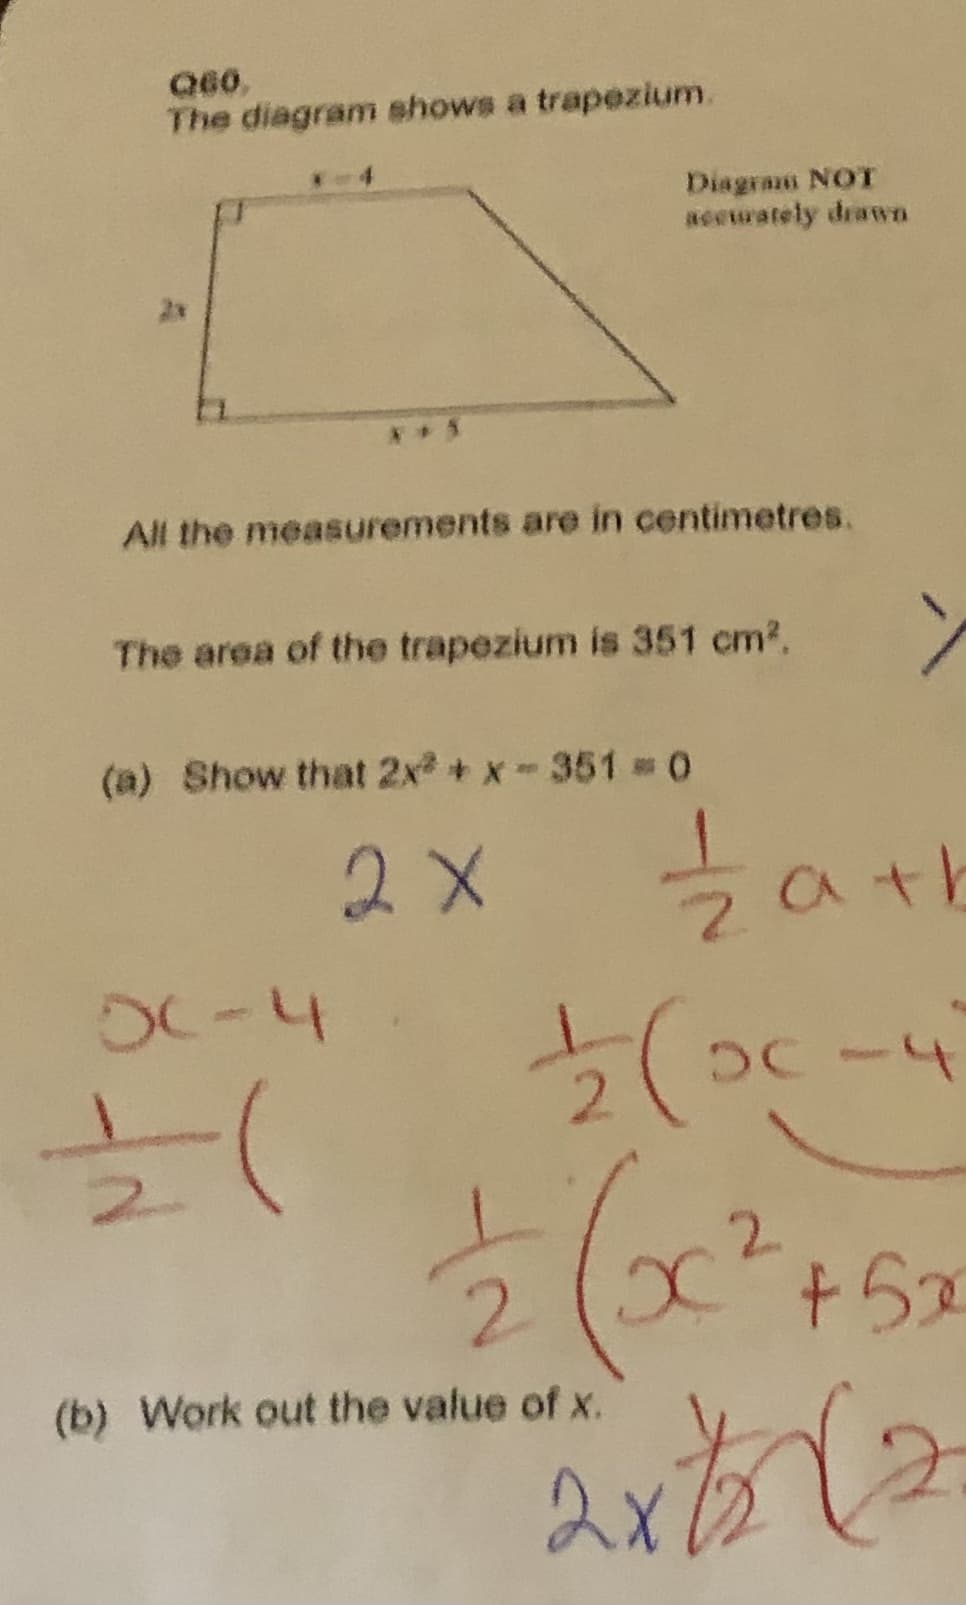 Q60,
The diagram shows a trapezium.
Diagram NOT
aesurately drawn
**5
All the measurements are in centimetres.
The area of the trapezium is 351 cm2,
(a) Show that 2x + x-3510
2 X
zath
OC-4
+5x
(b) Work out the value of x.
2x12
